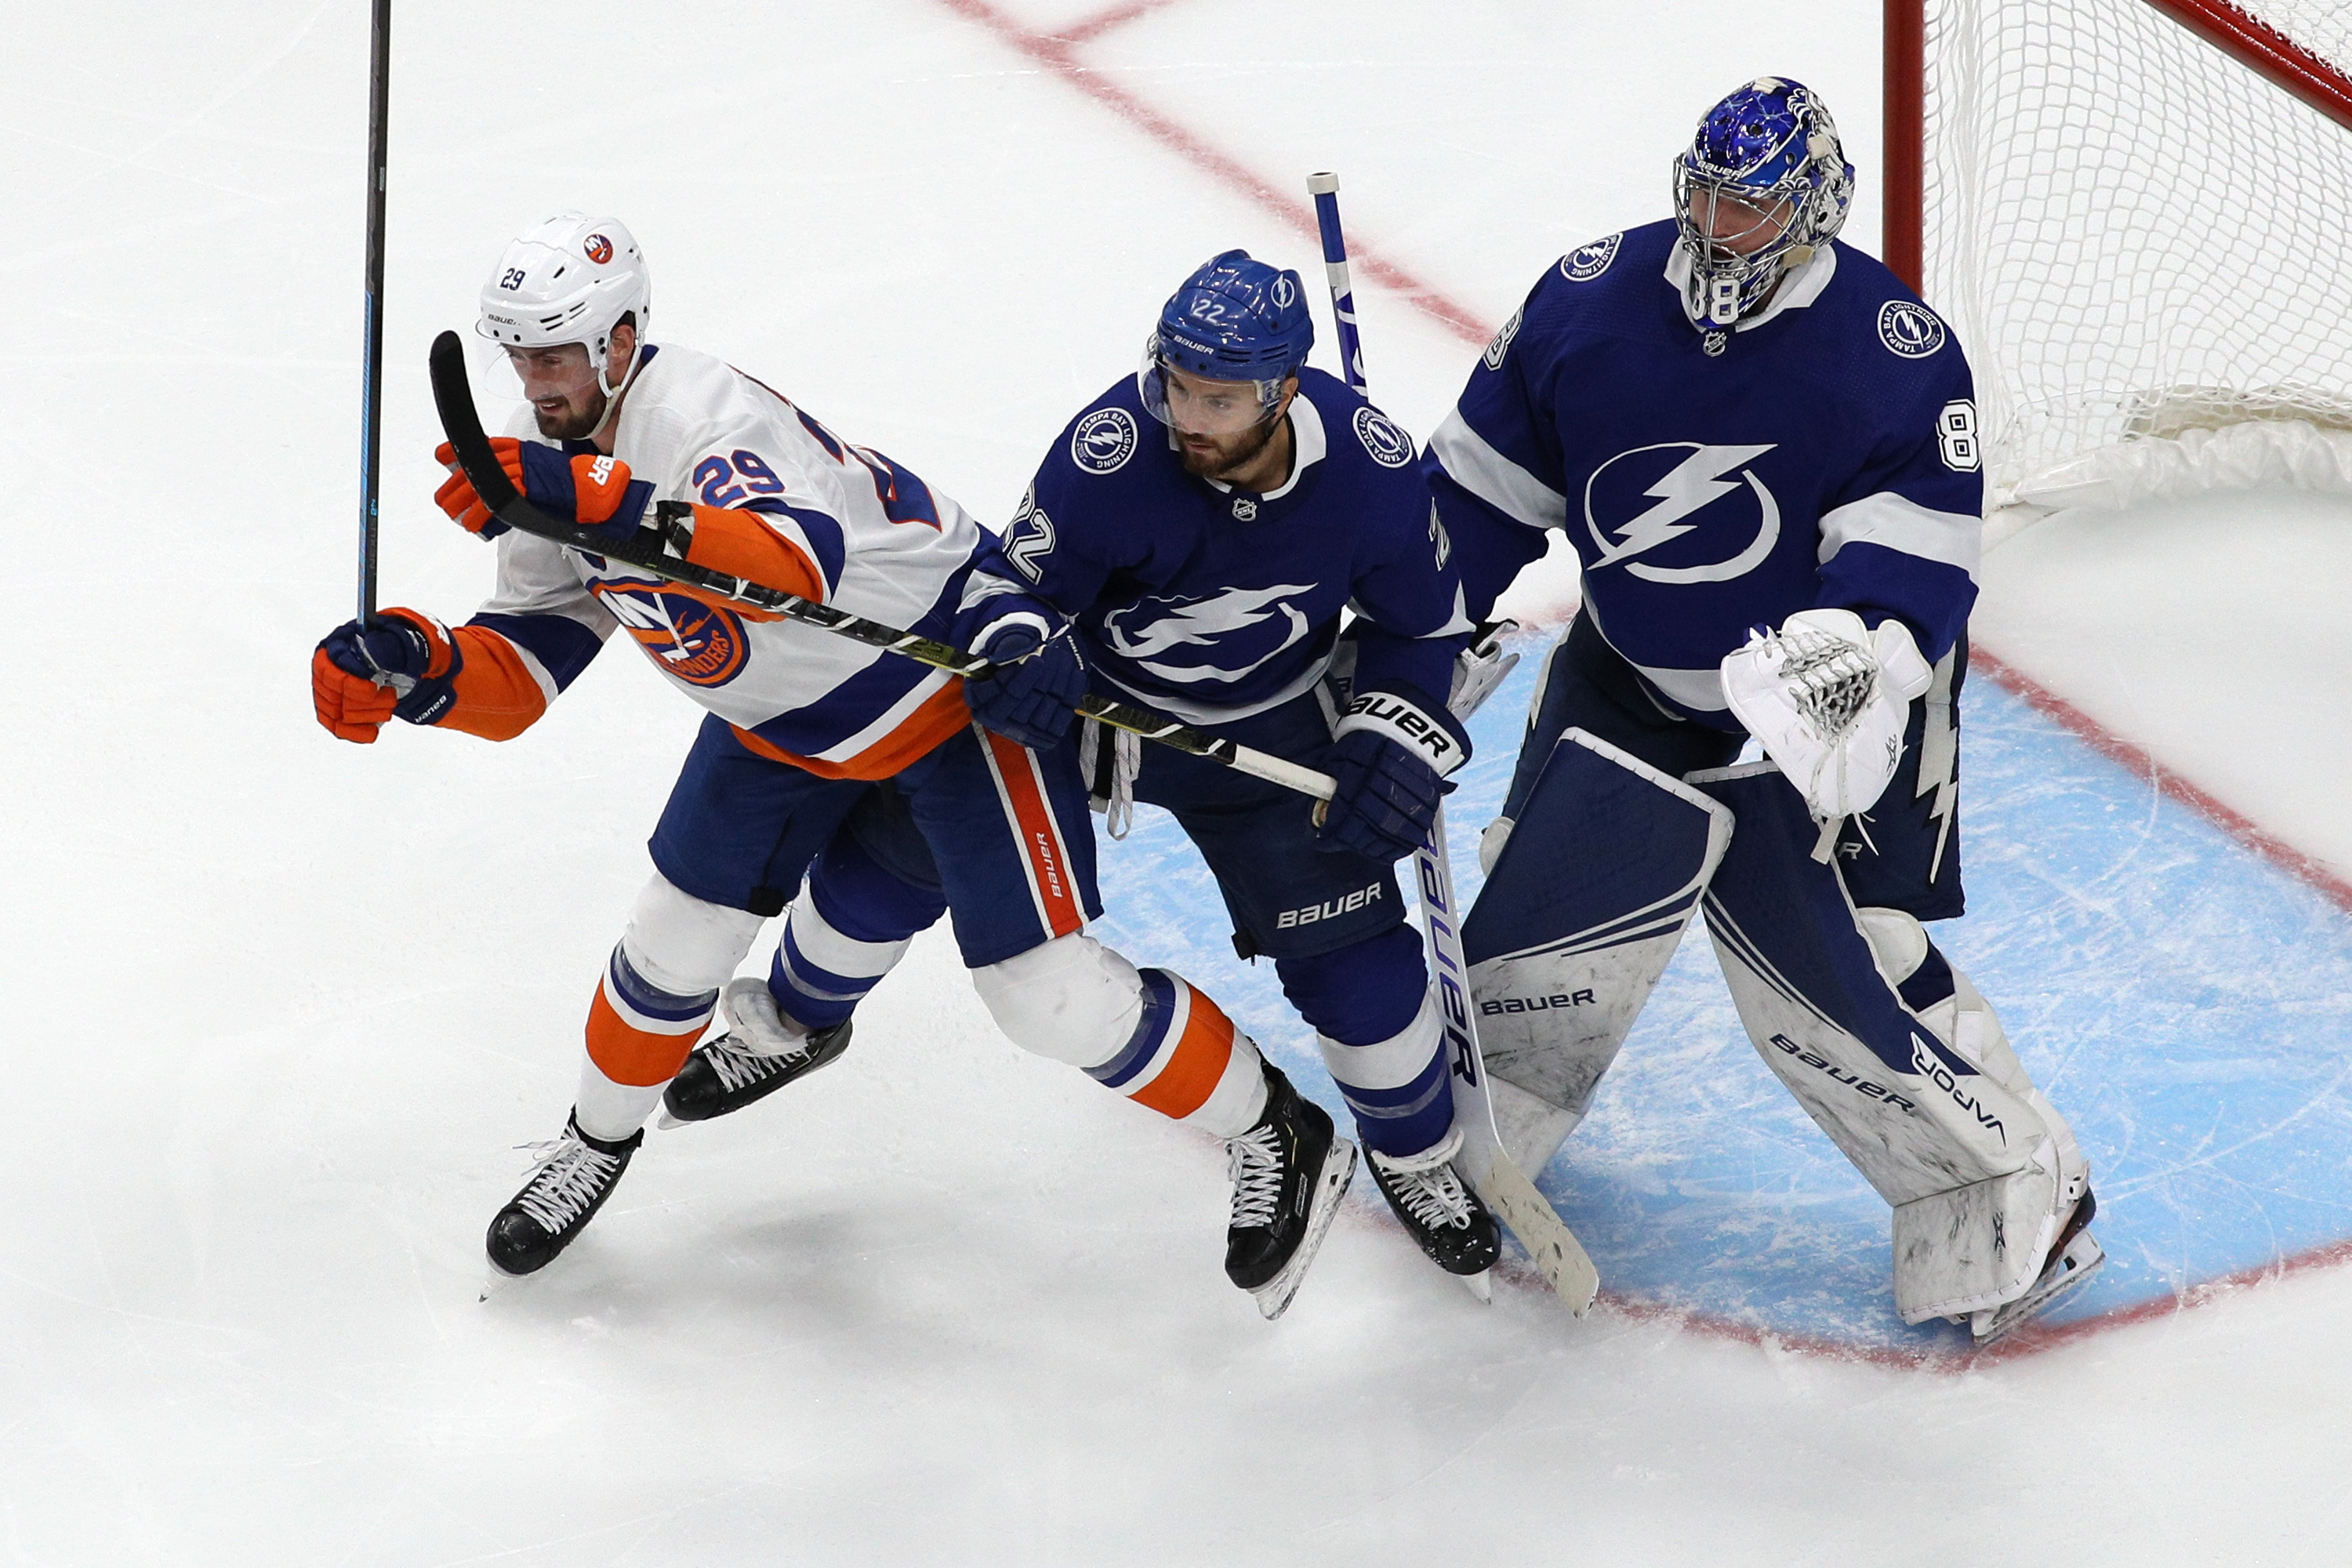 In heartbreaking loss, Lightning still made Tampa Bay proud to 'Be